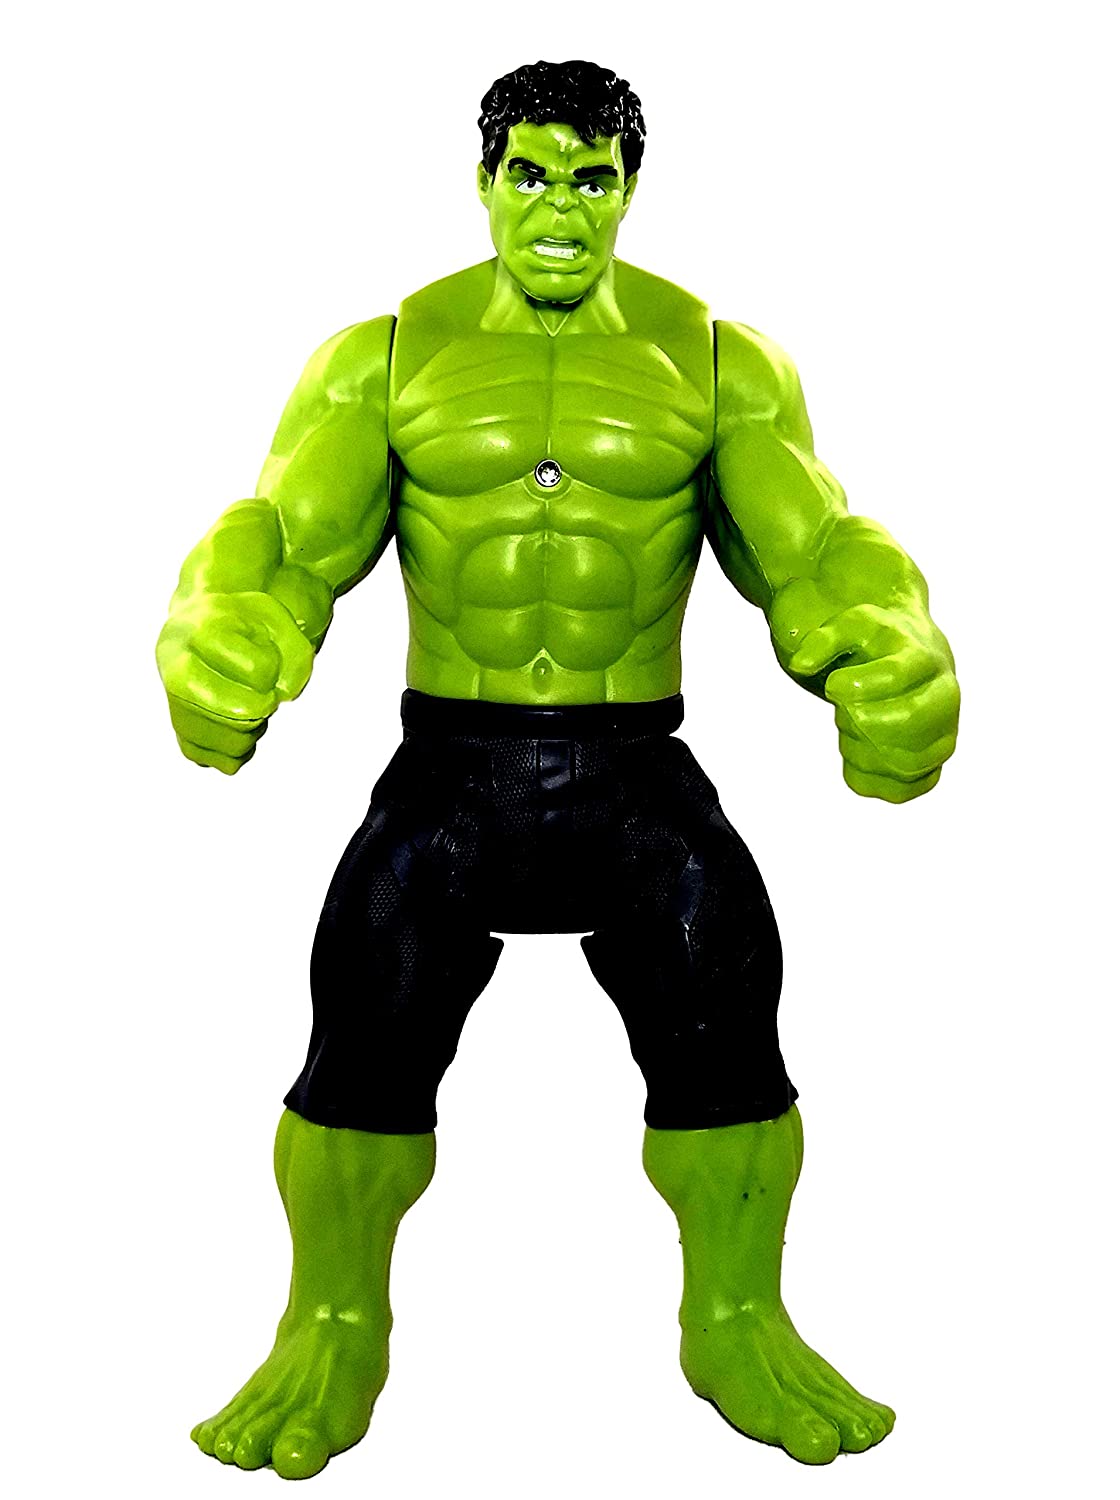 Large Size 64cm superhero Green man GREEN GIANT PVC Action figure Statue Collection model toy adult gift